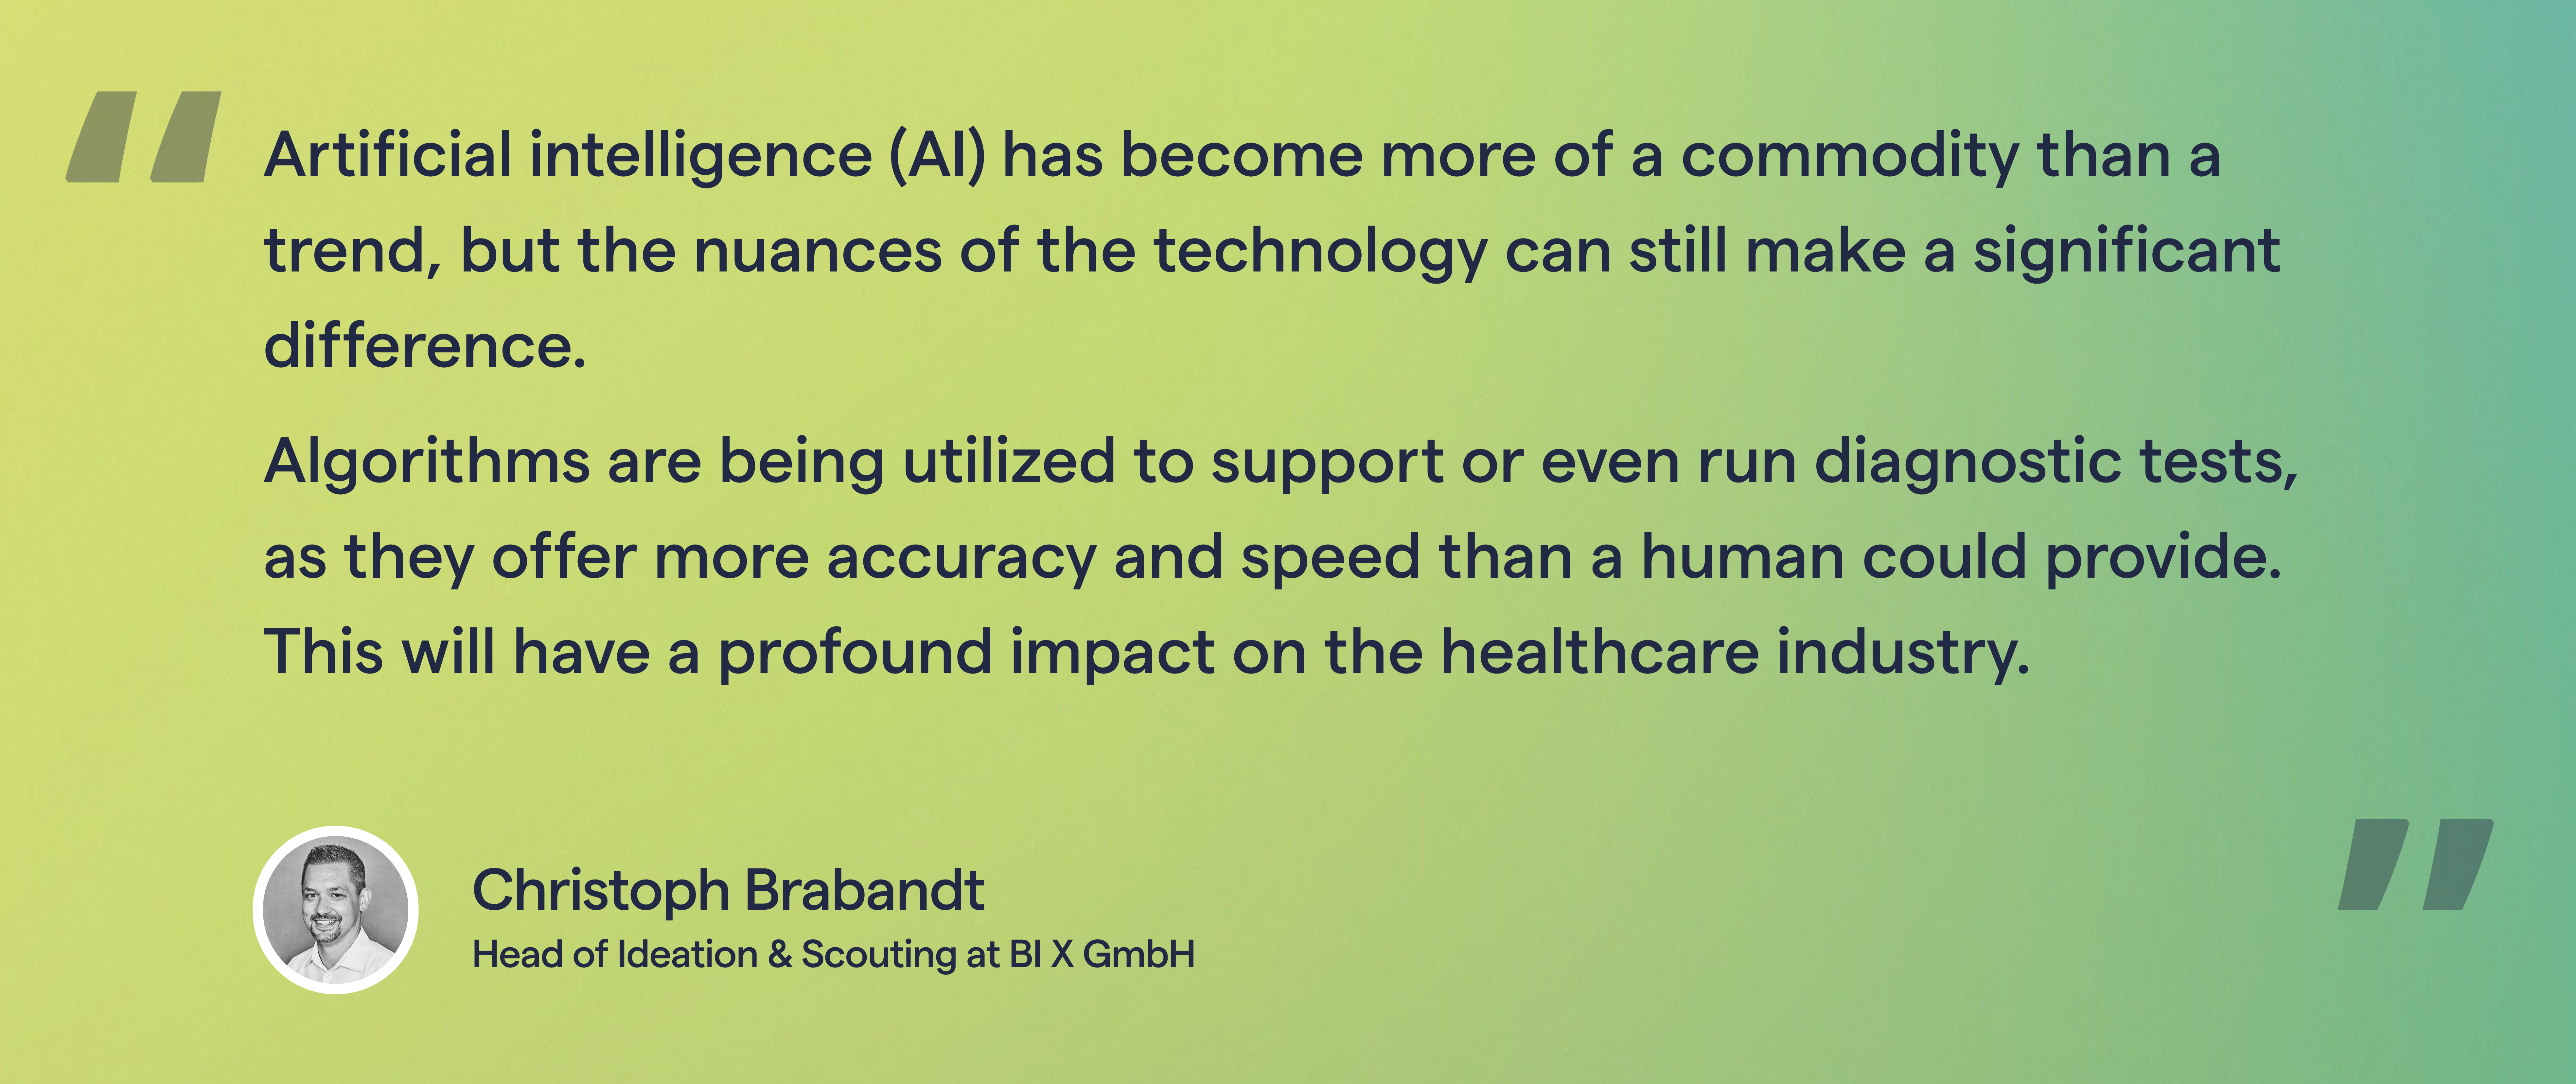 Christoph Brandt about AI in Healthcare